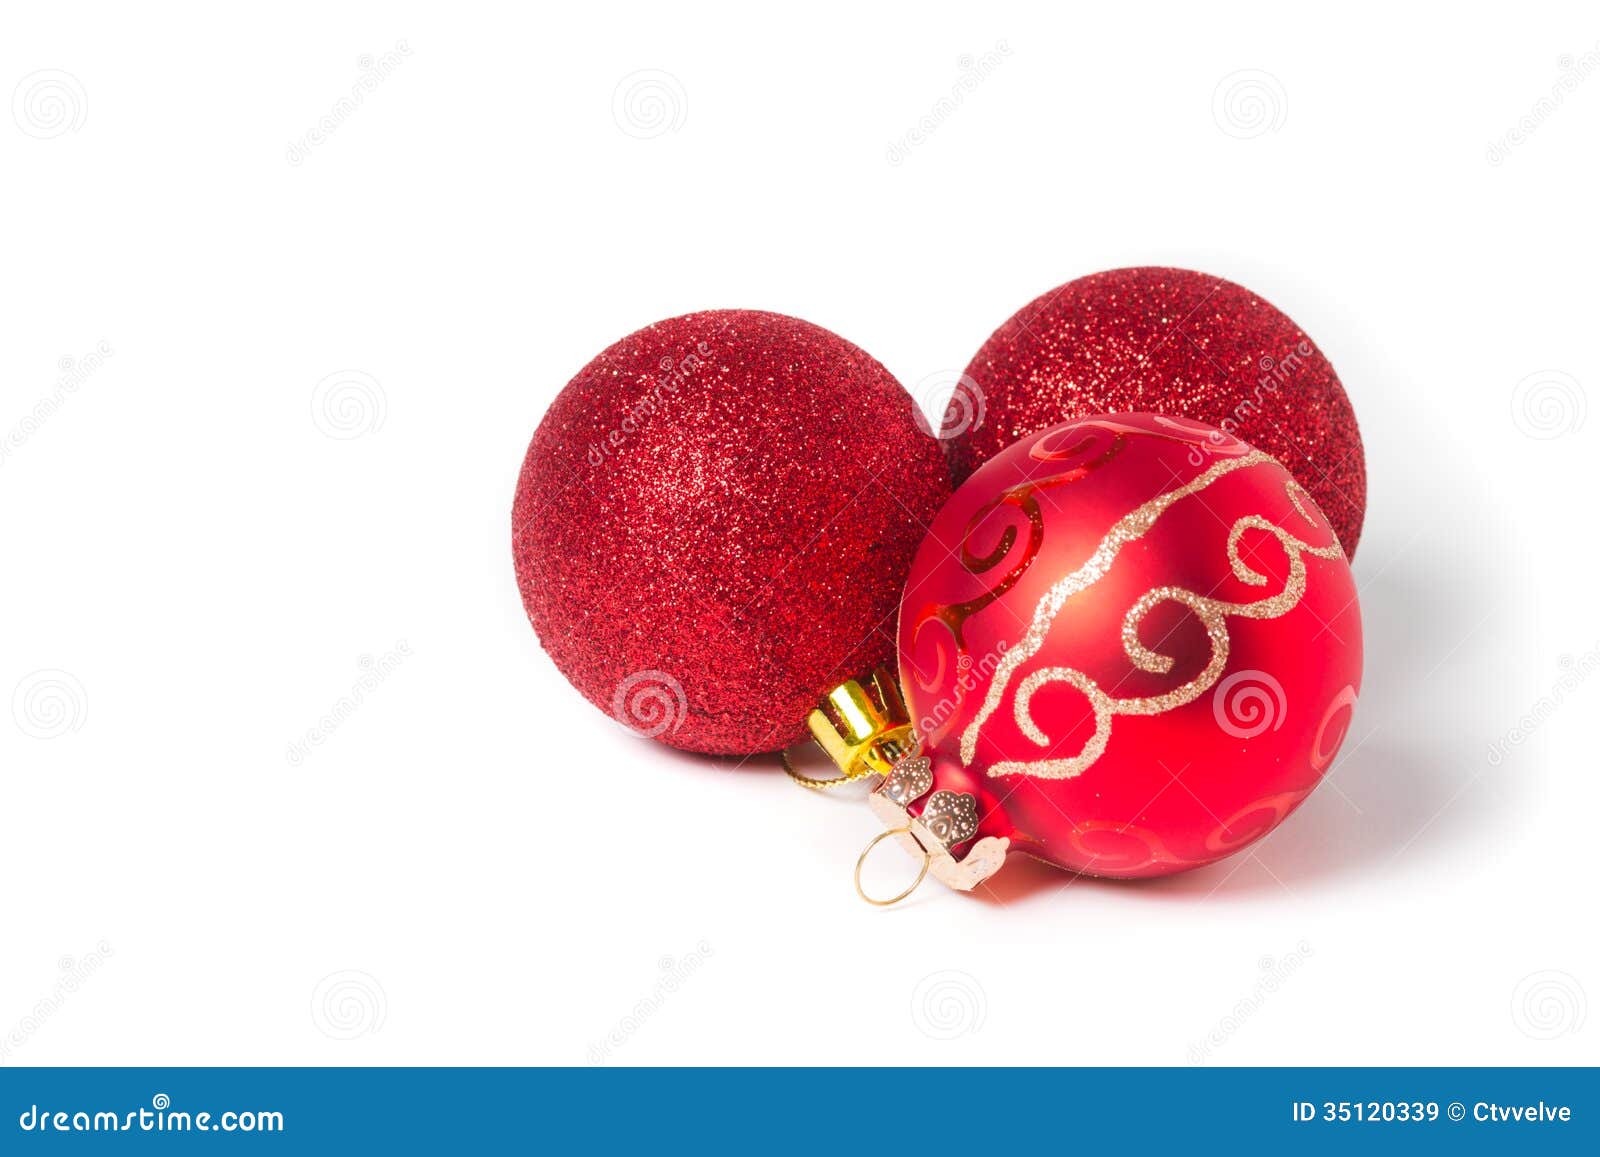 Red Christmas Ornaments Ball on White. Stock Image - Image of ball ...